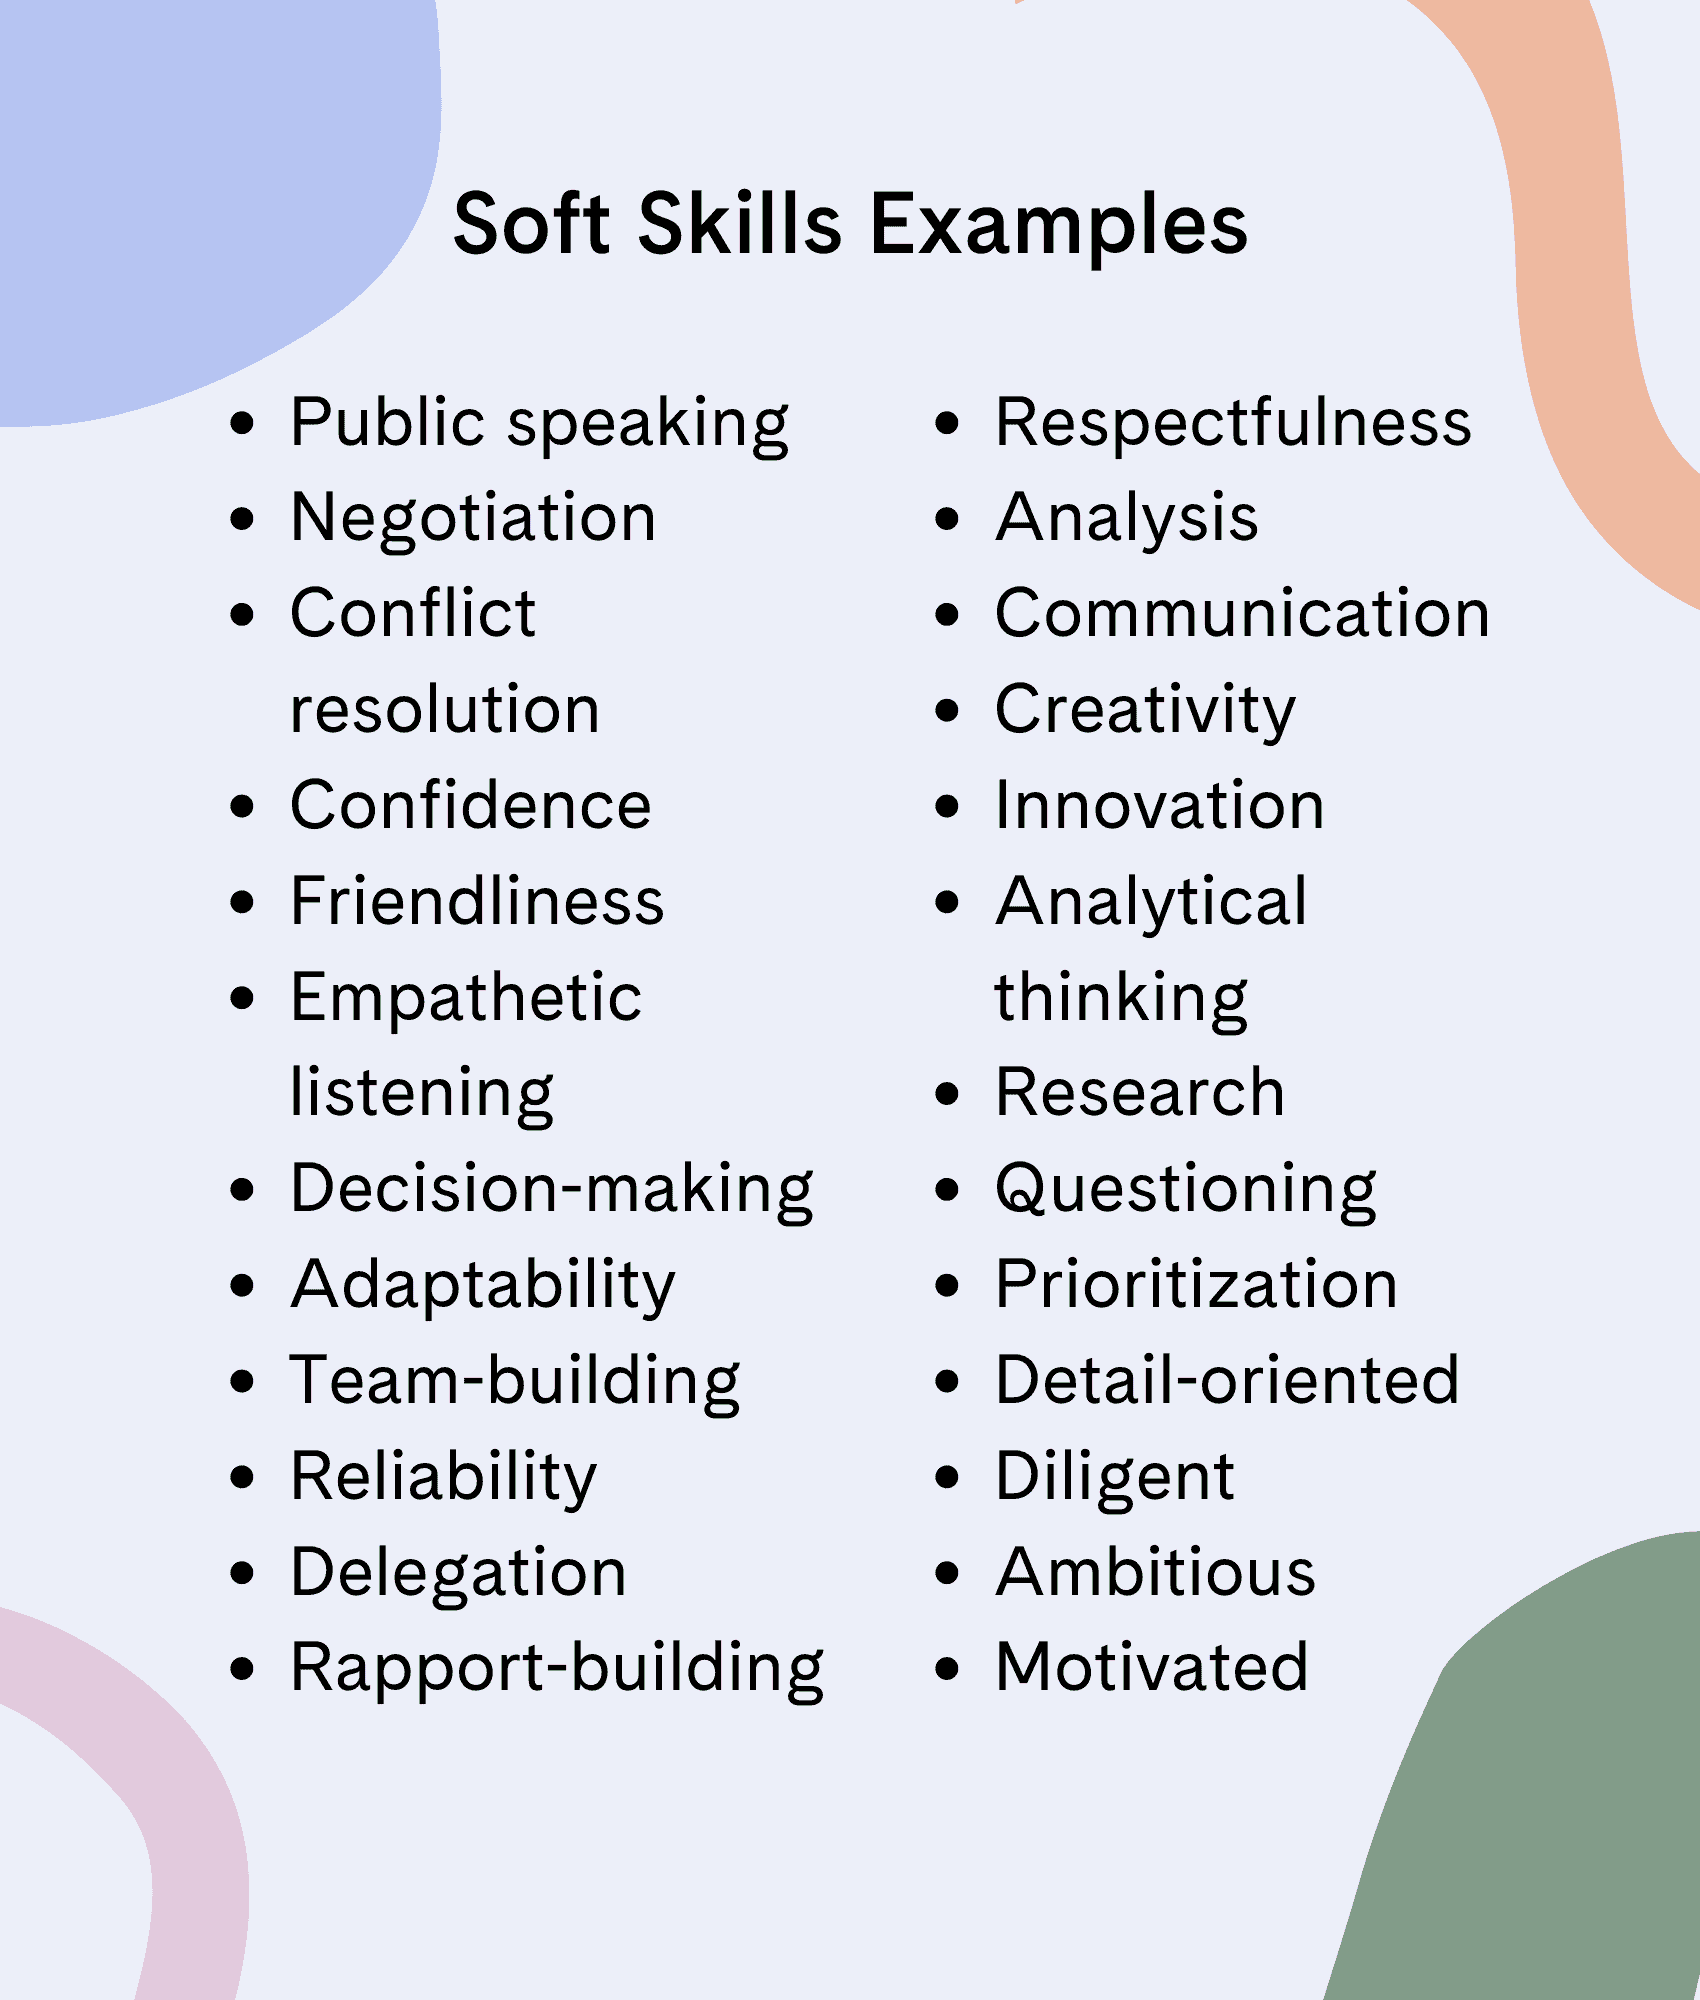 research on soft skills